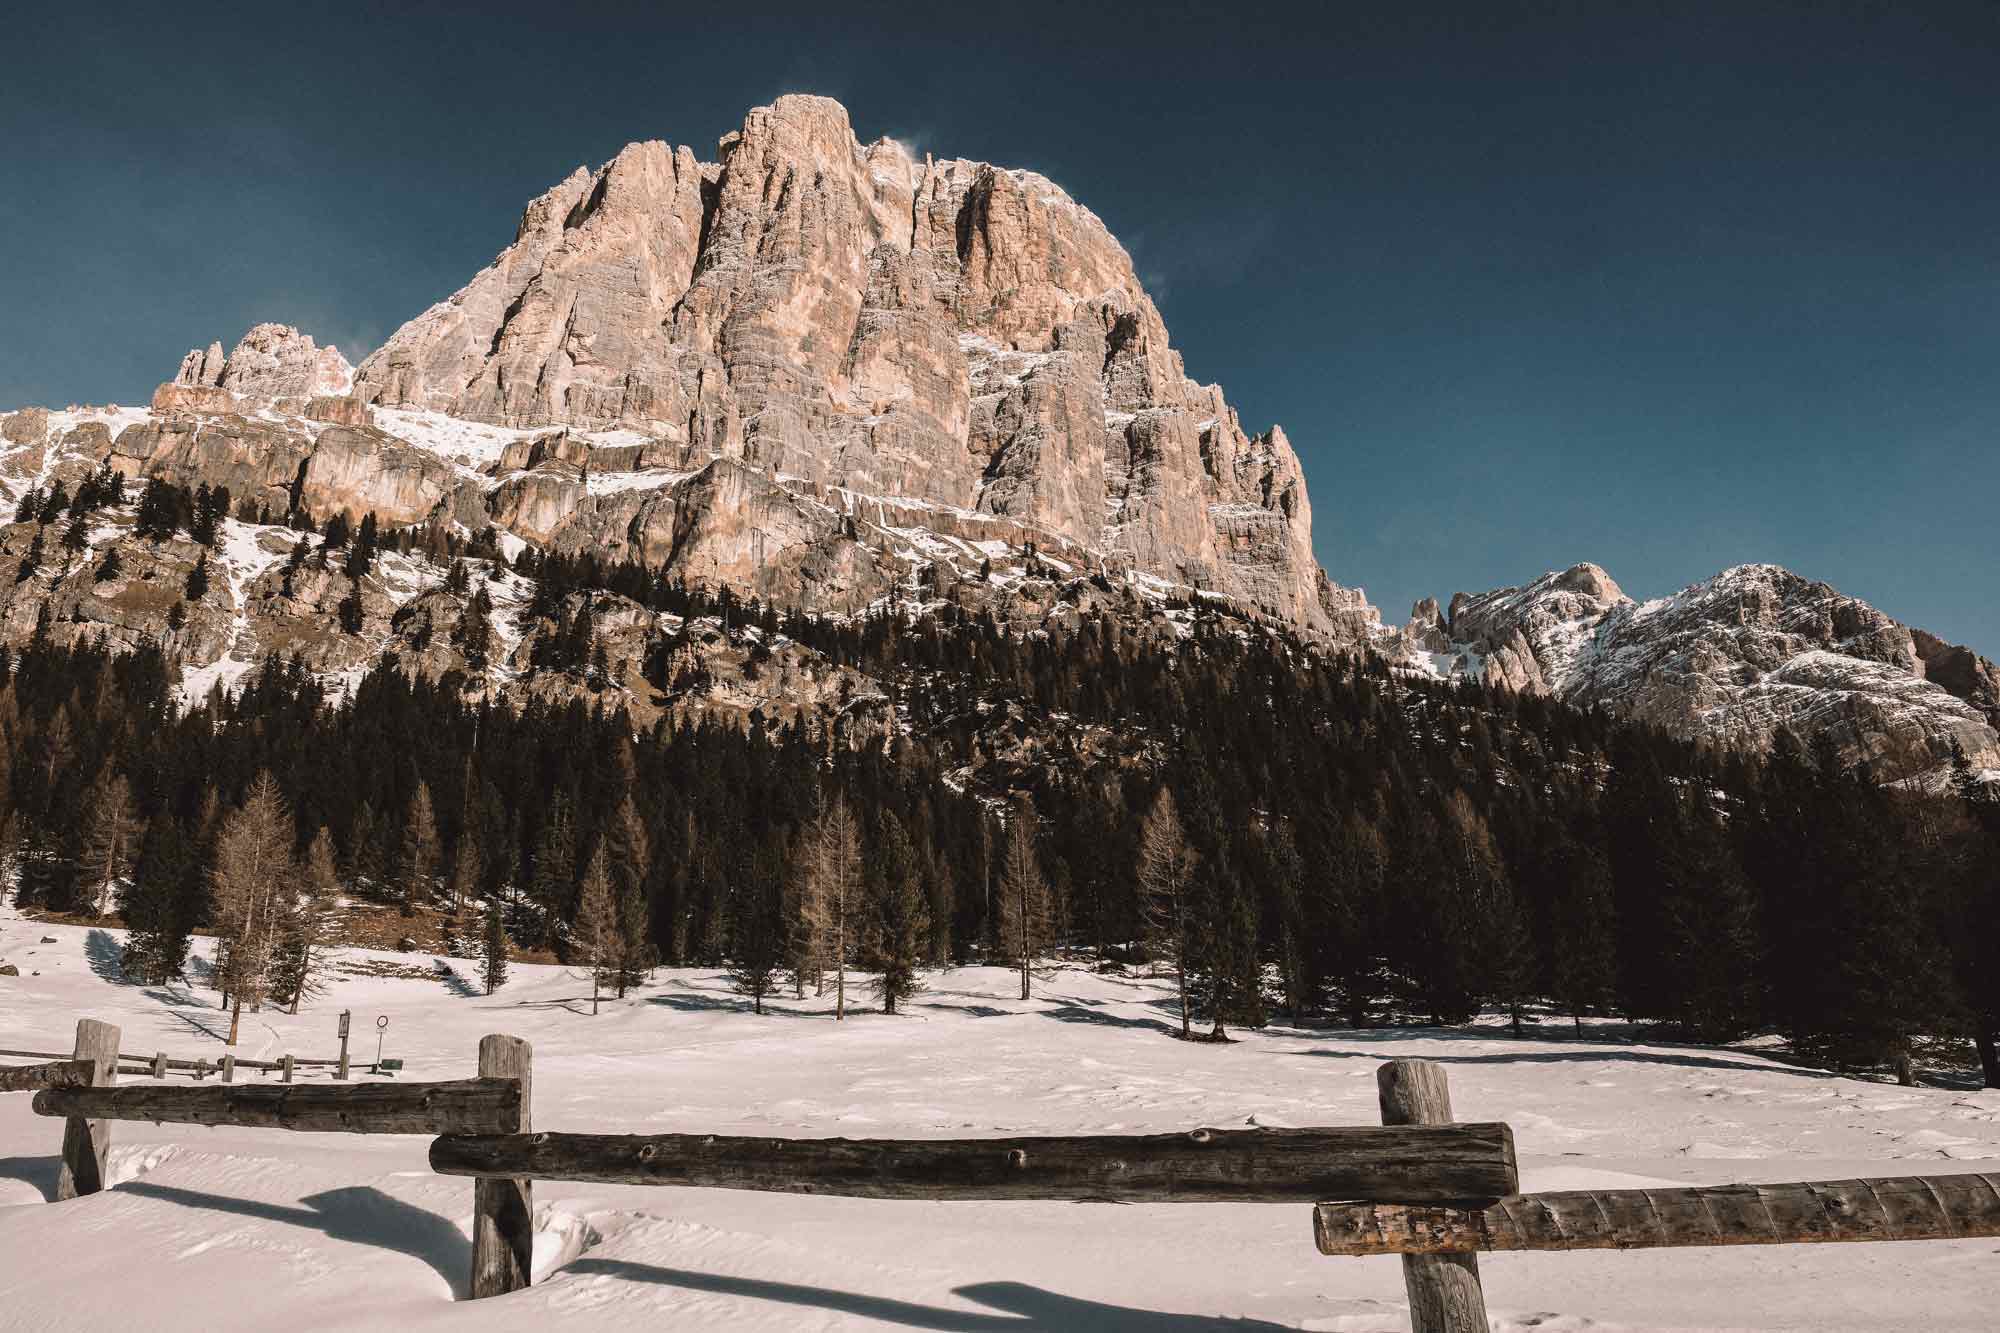 Snowy mountain landscape with wooden fence in Cortina d'Ampezzo